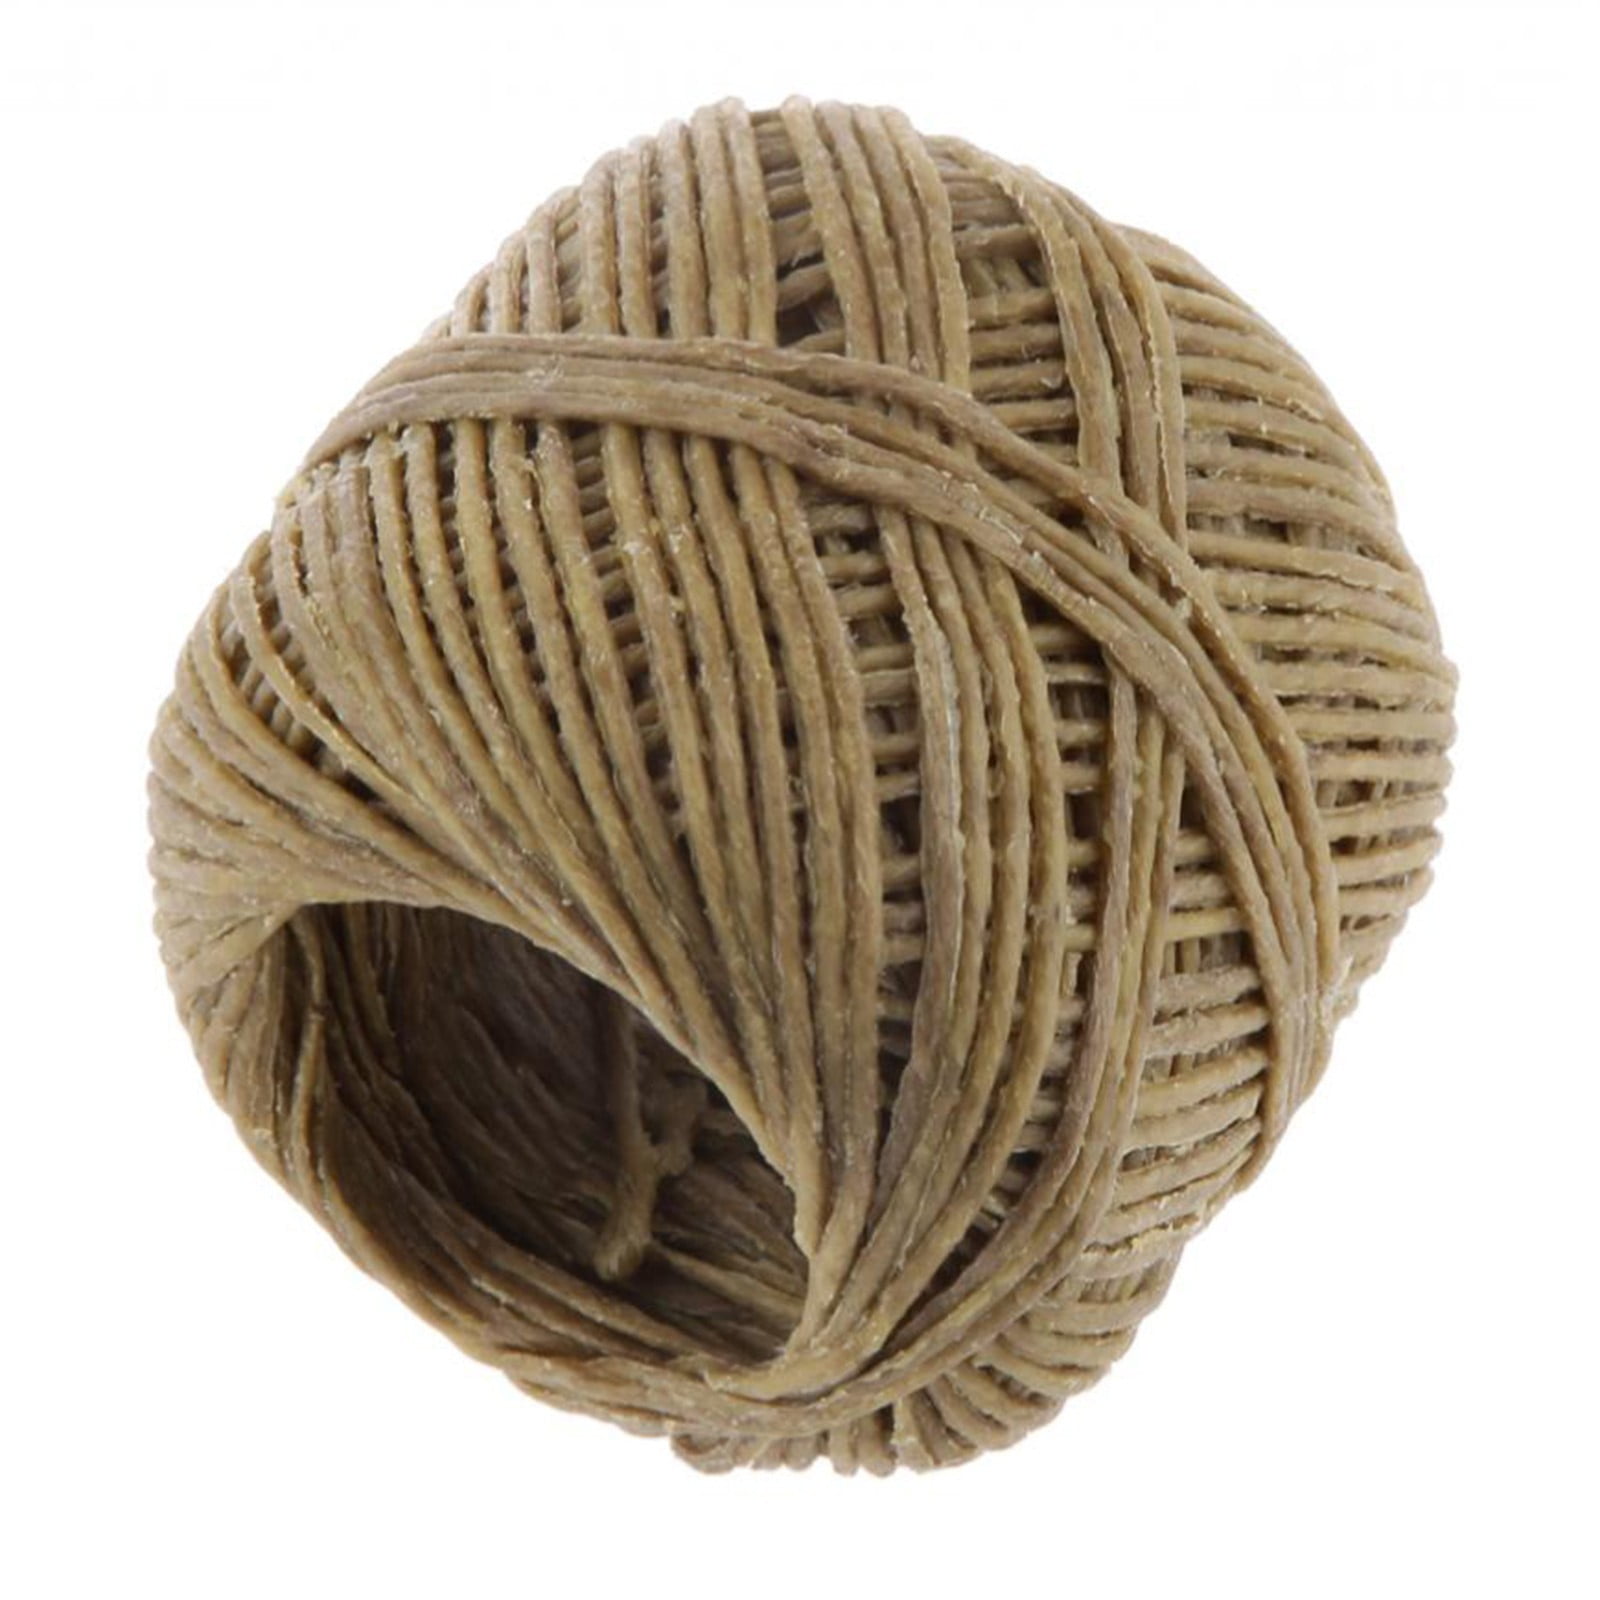 Twisted Bee 61m x Standard 100% Organic Hemp Wick with Natural Beeswax Coating 